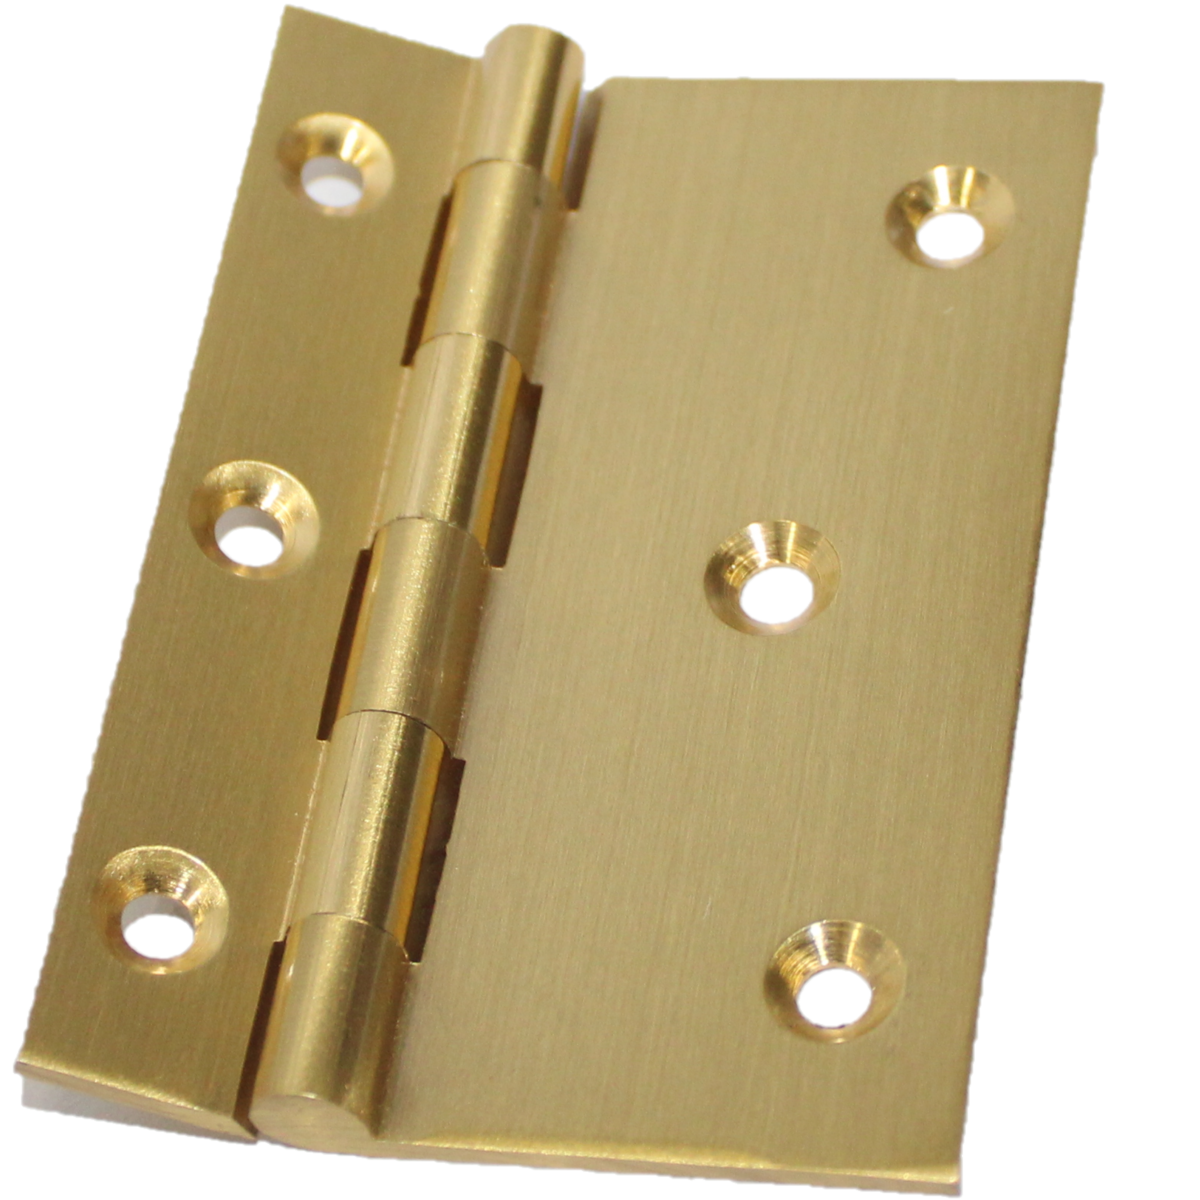 RiseOm Butt Hinges/Cut Hinges of Brass